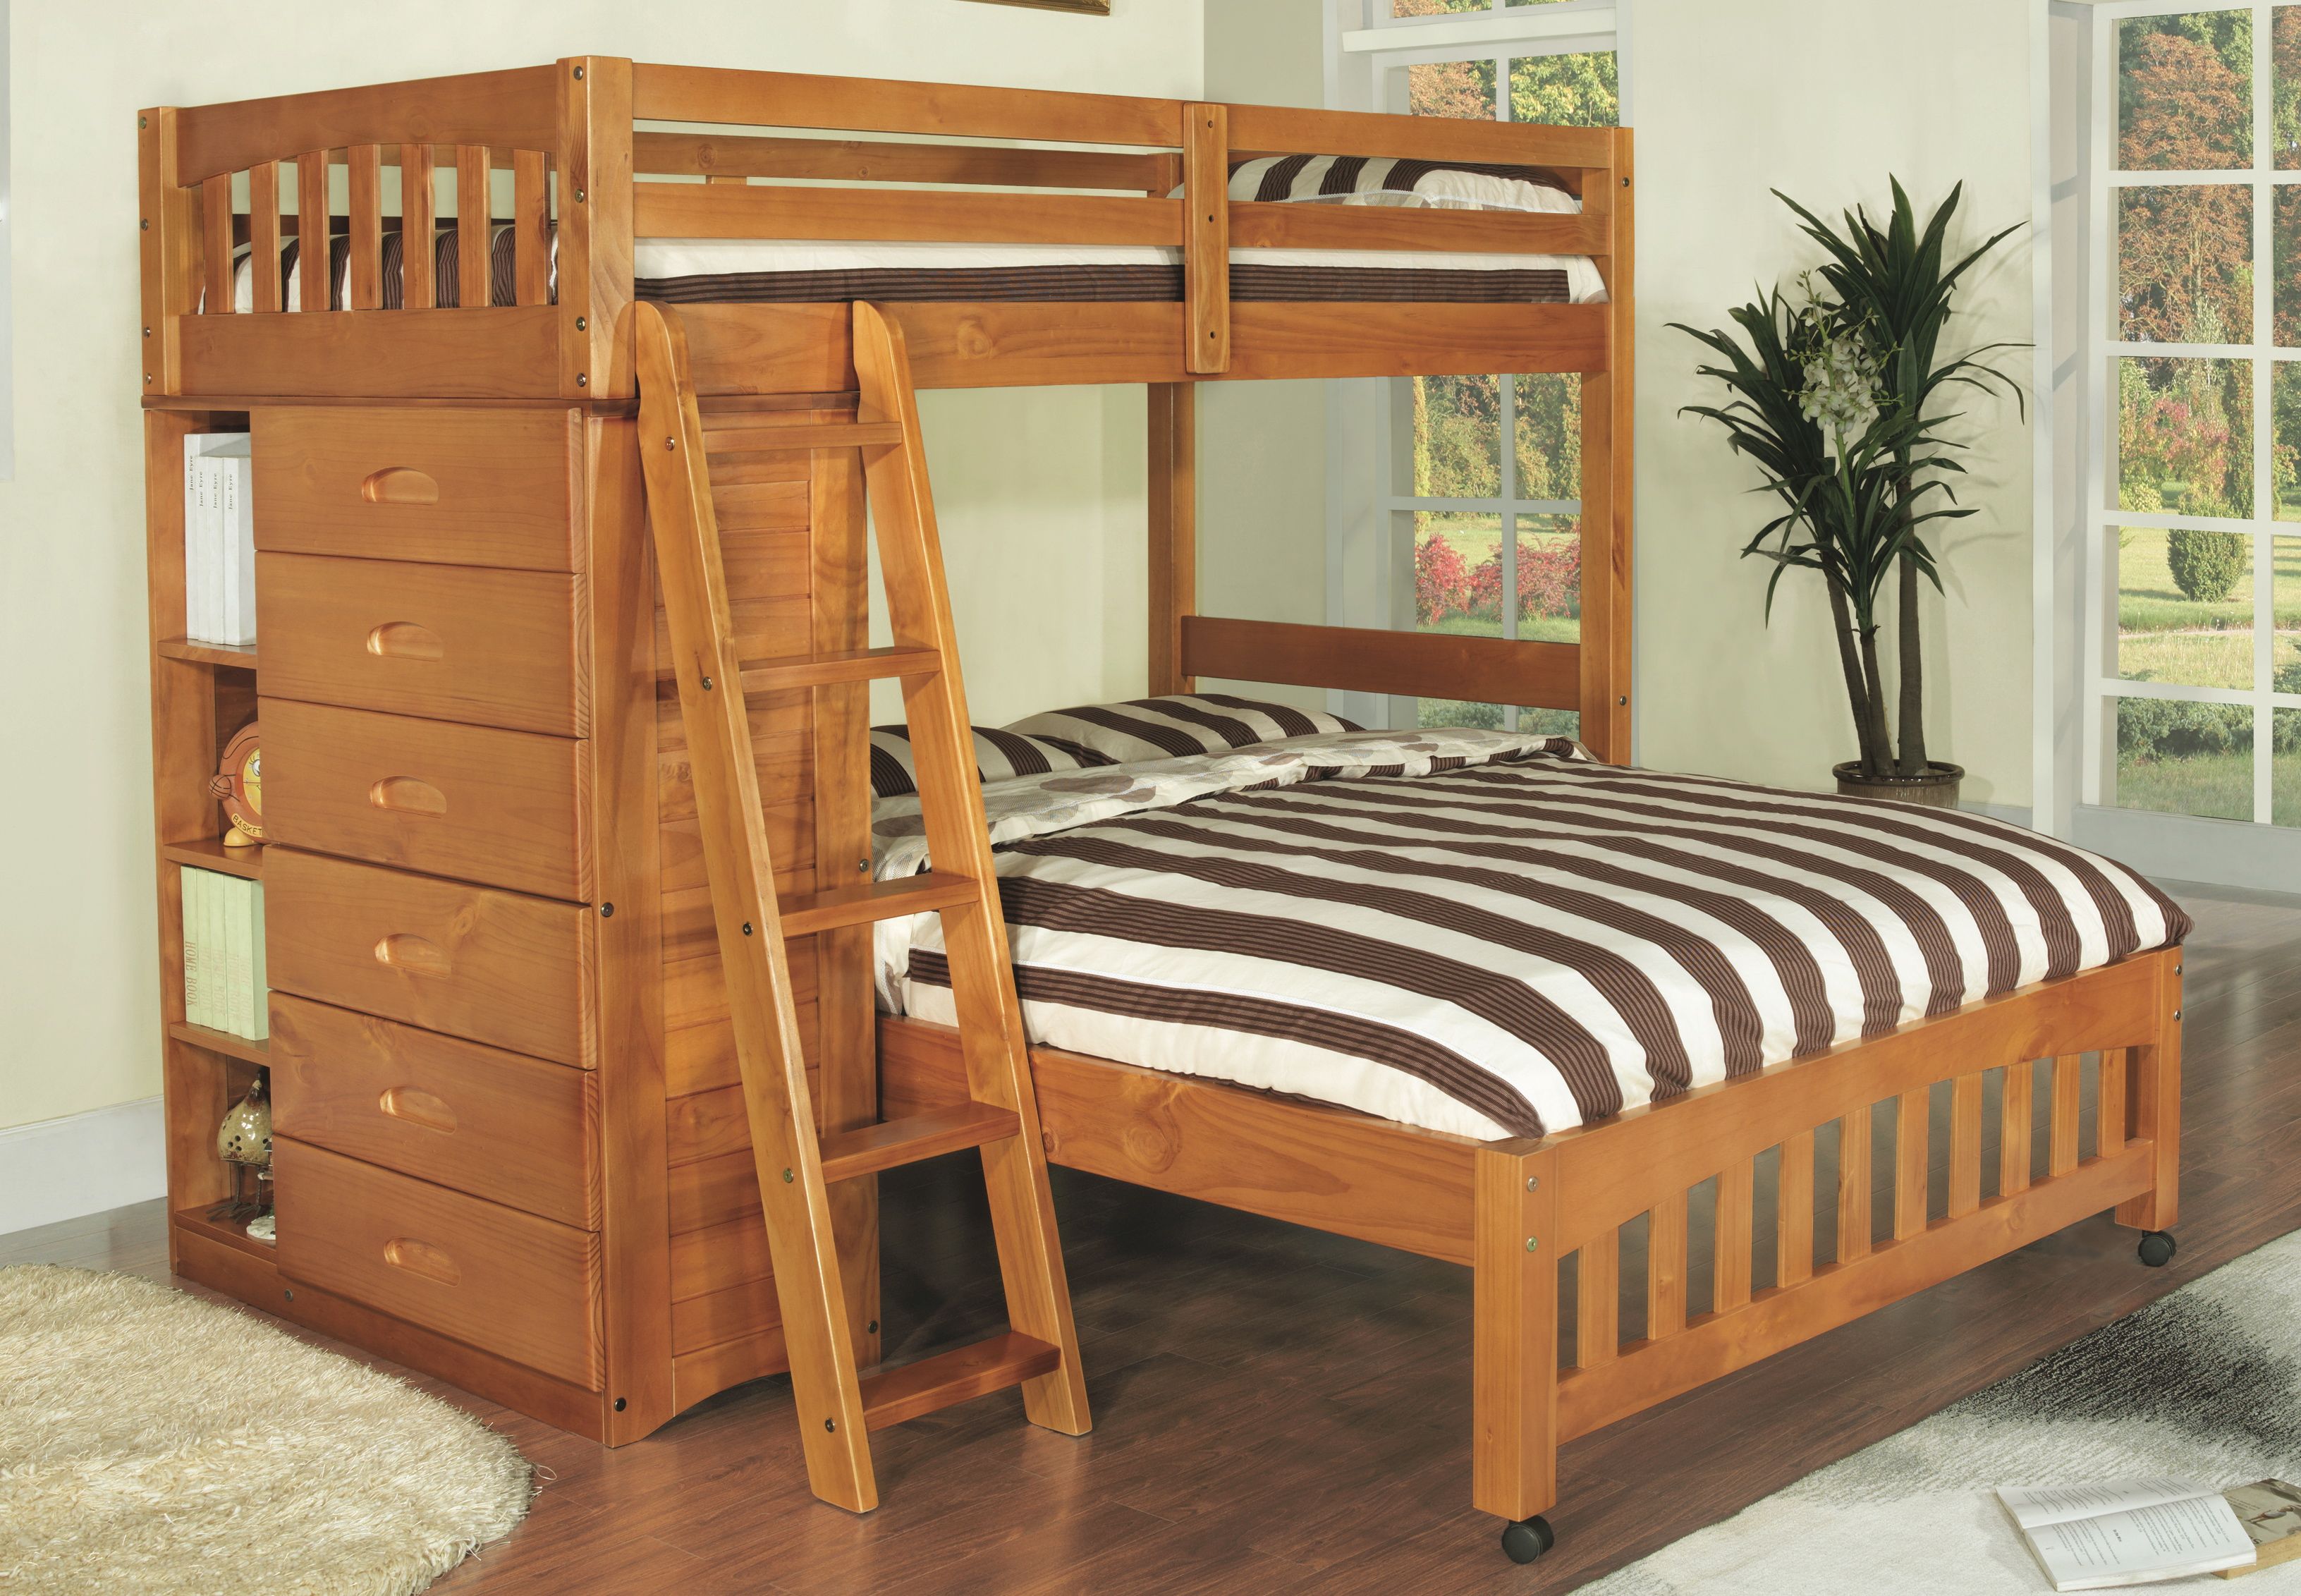 Honey Loft Bunk Beds, Canyon Furniture Company Bunk Bed Assembly Instructions